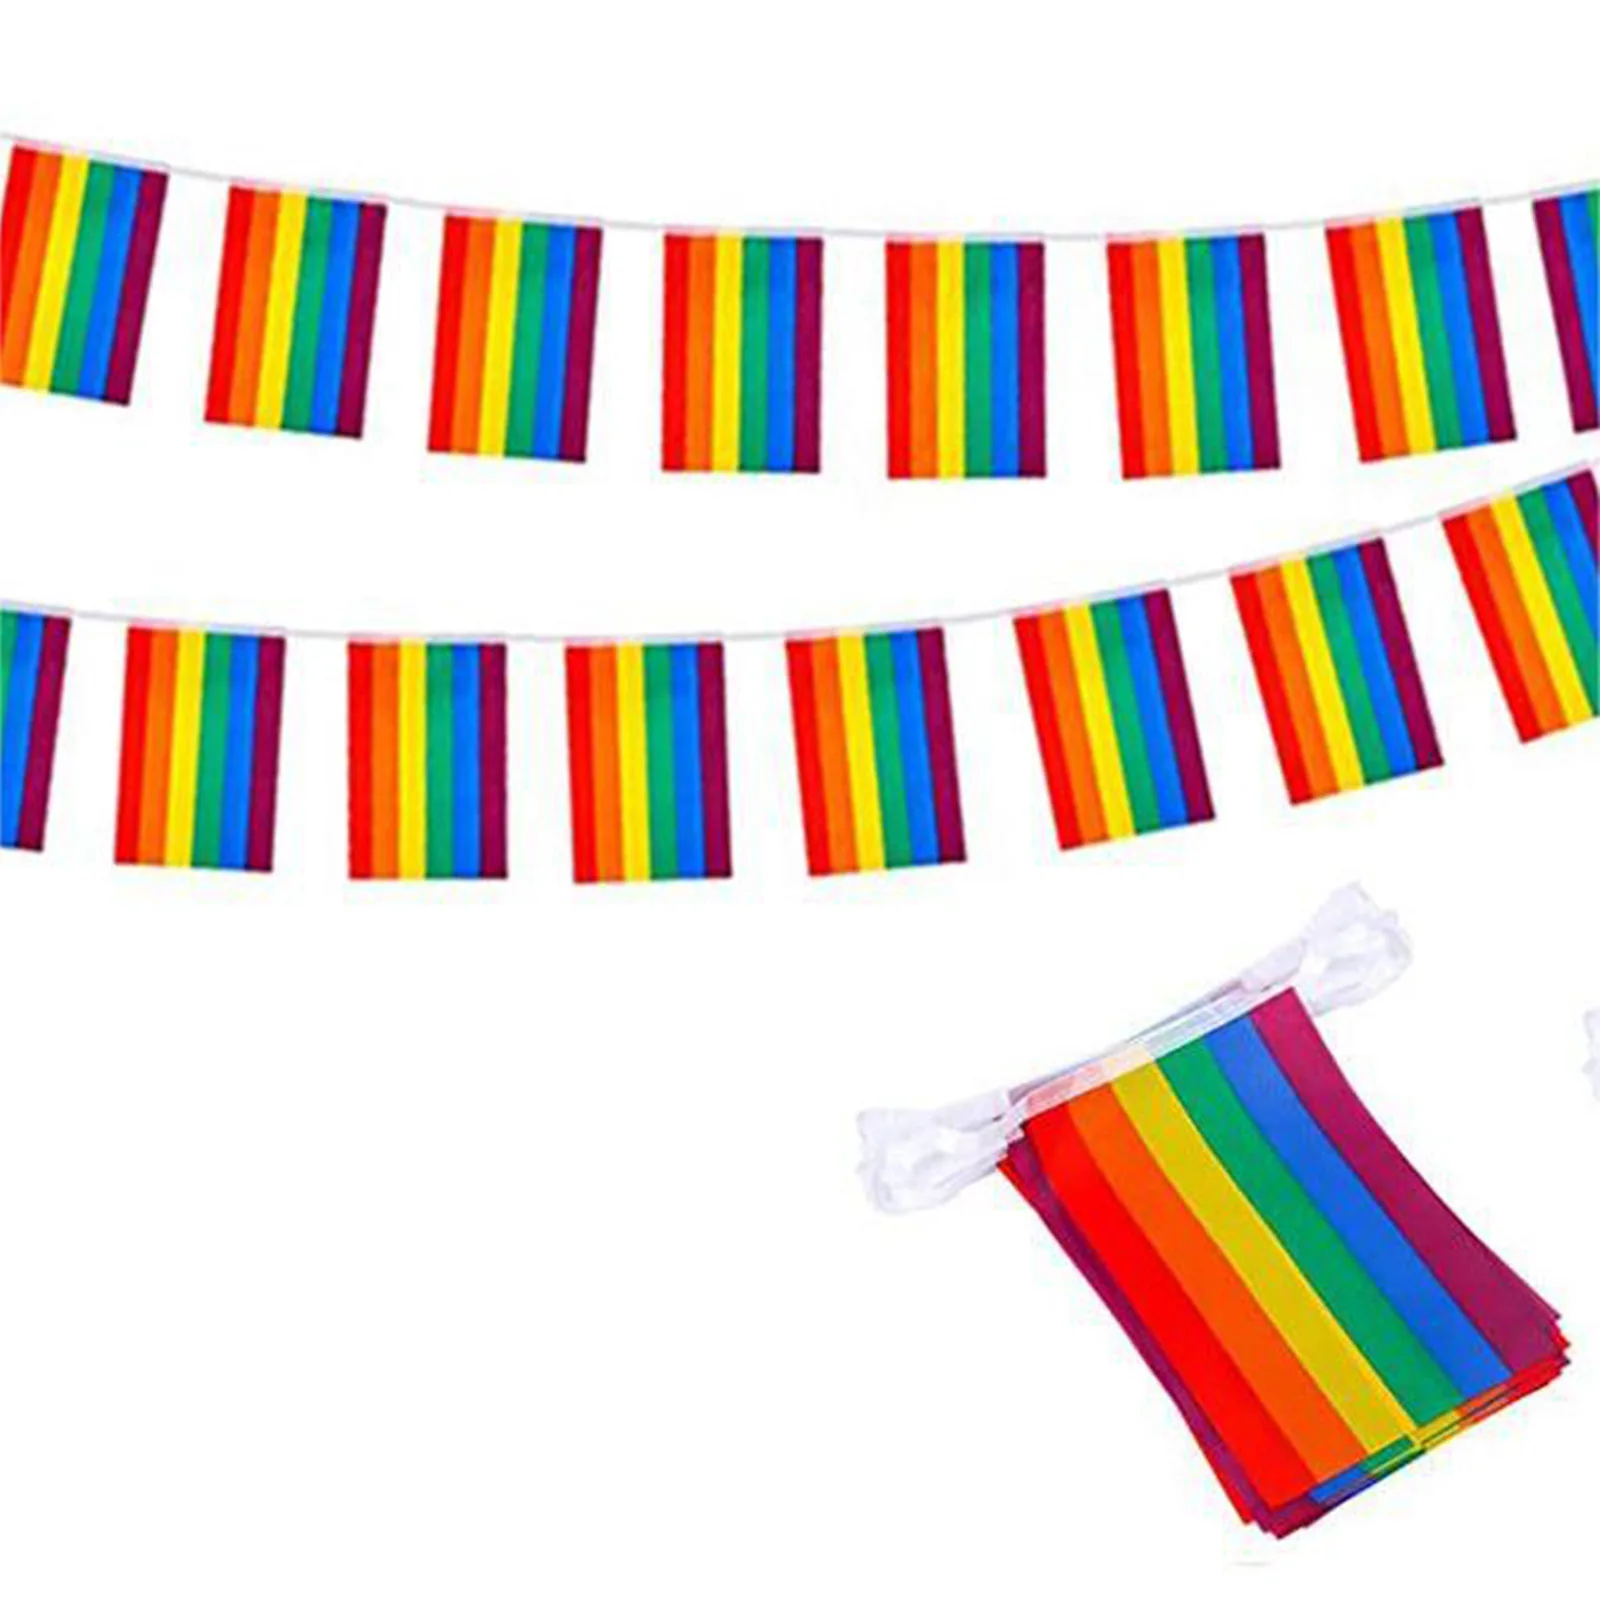 

Brand New Banners Rainbow Flag Festival Party Celebration For LGBT Indoor/Outdoor Pride Banner String Flag 20 Flags